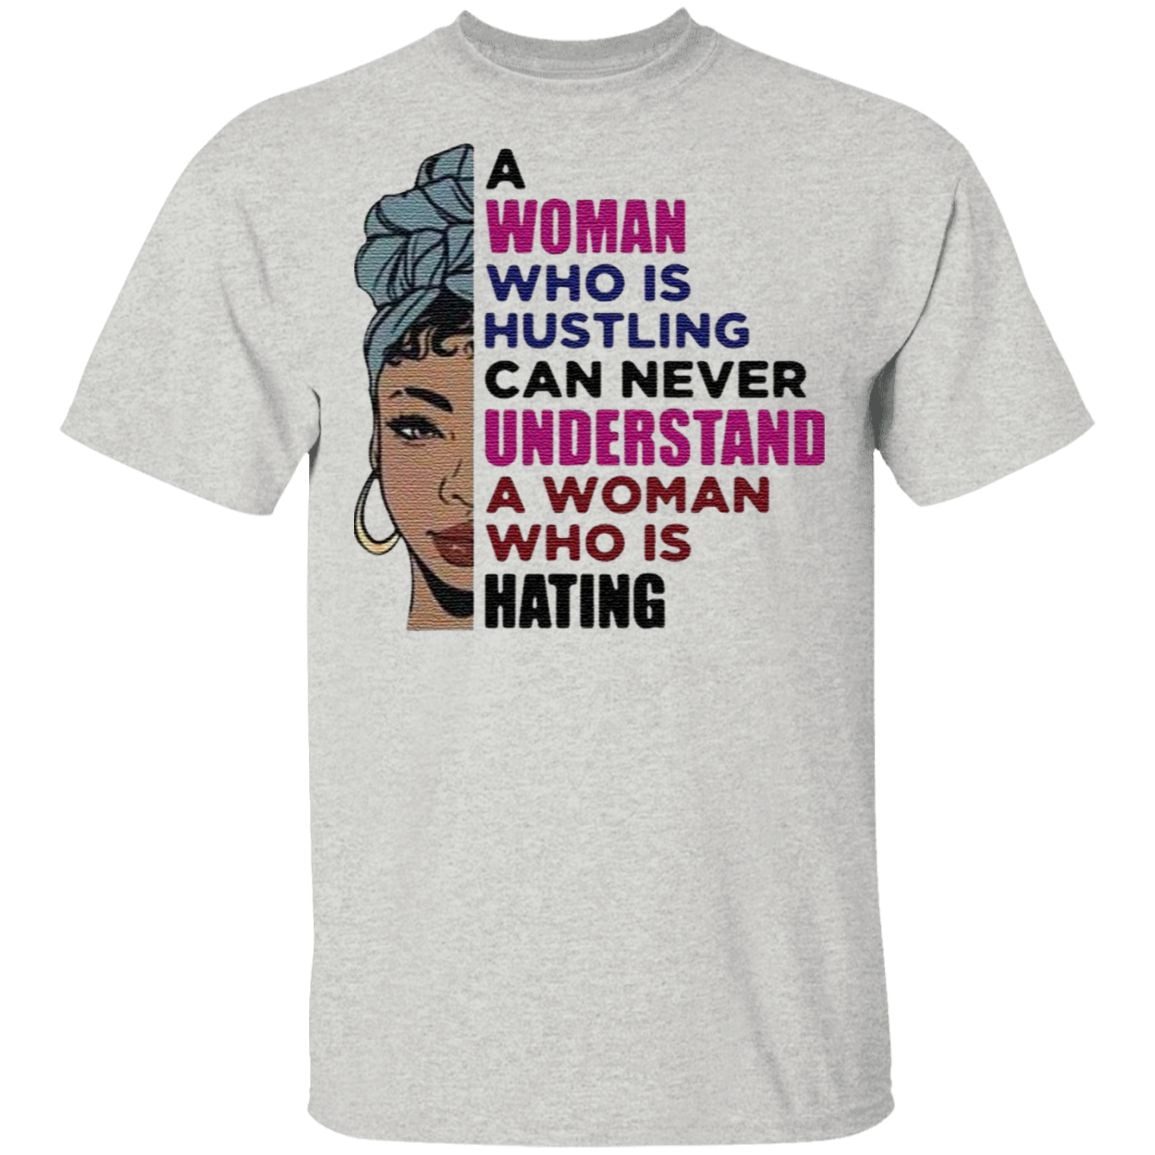 A Woman Who Is Hustling Can Never Understand A Woman Who Is Hating Shirt